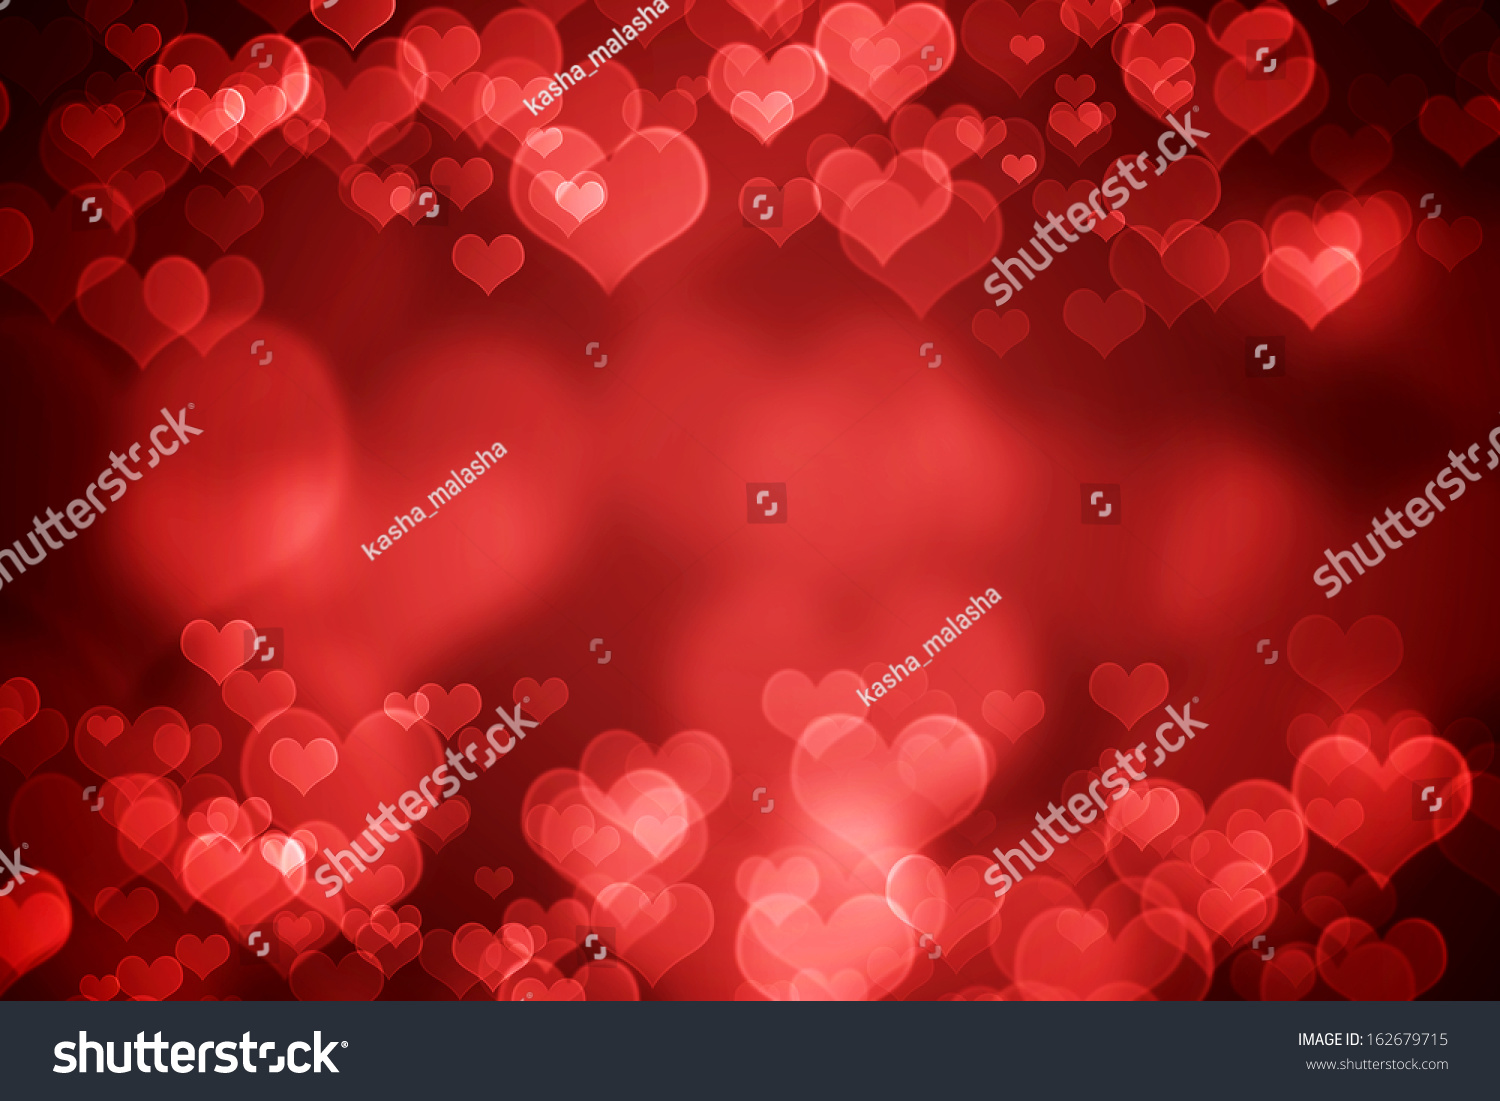 Red Glowing Heart Shaped Bokeh Valentines Stock Illustration 162679715 ...